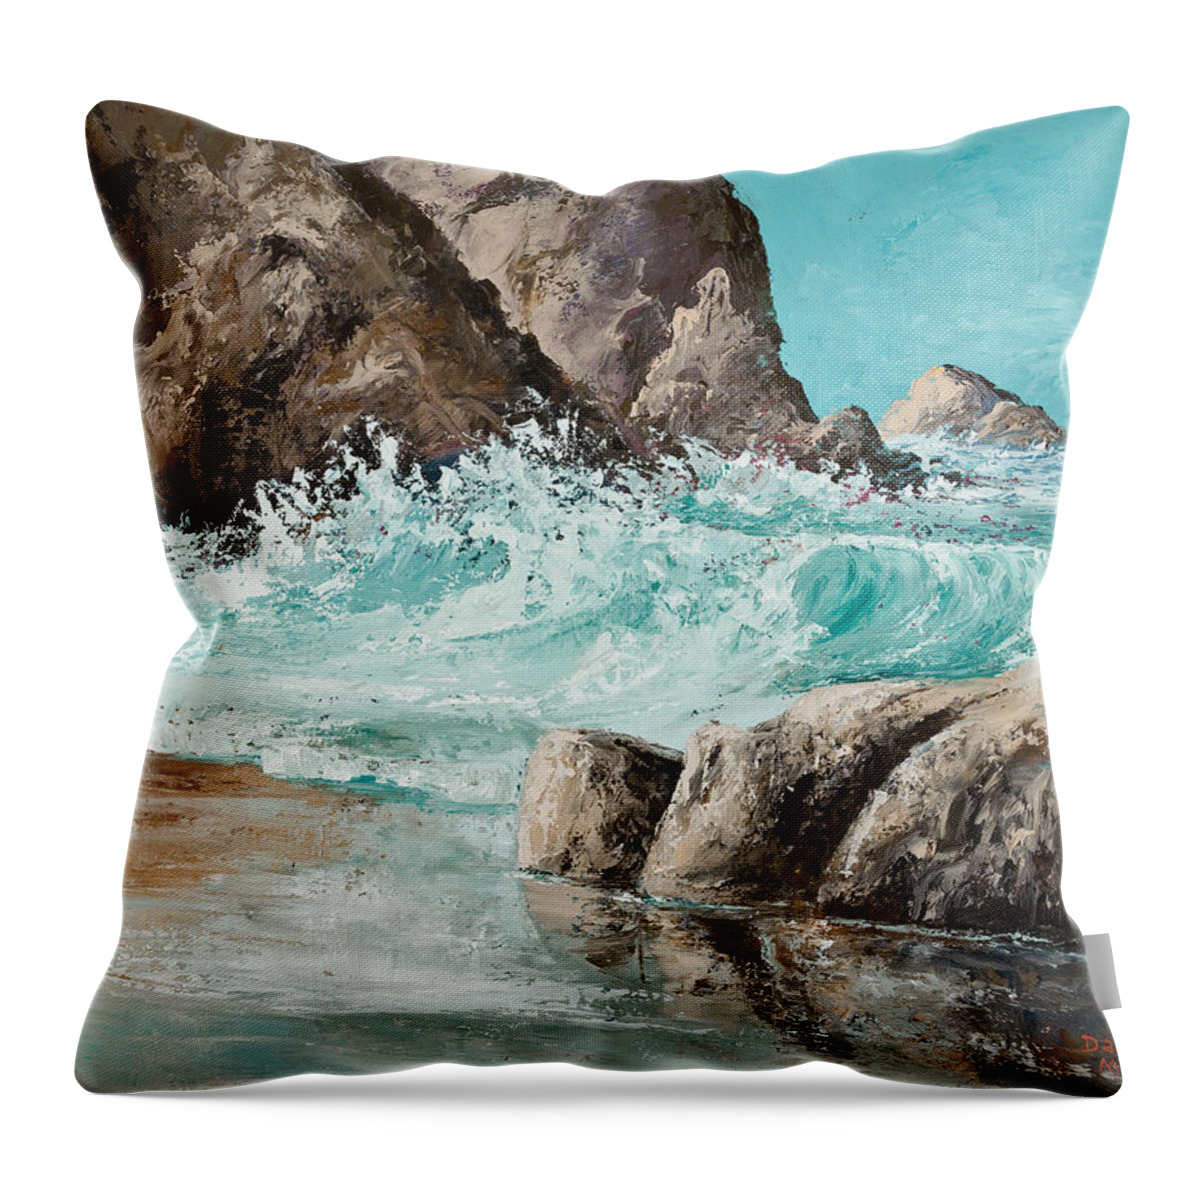 Ocean Throw Pillow featuring the painting Crashing Waves by Darice Machel McGuire